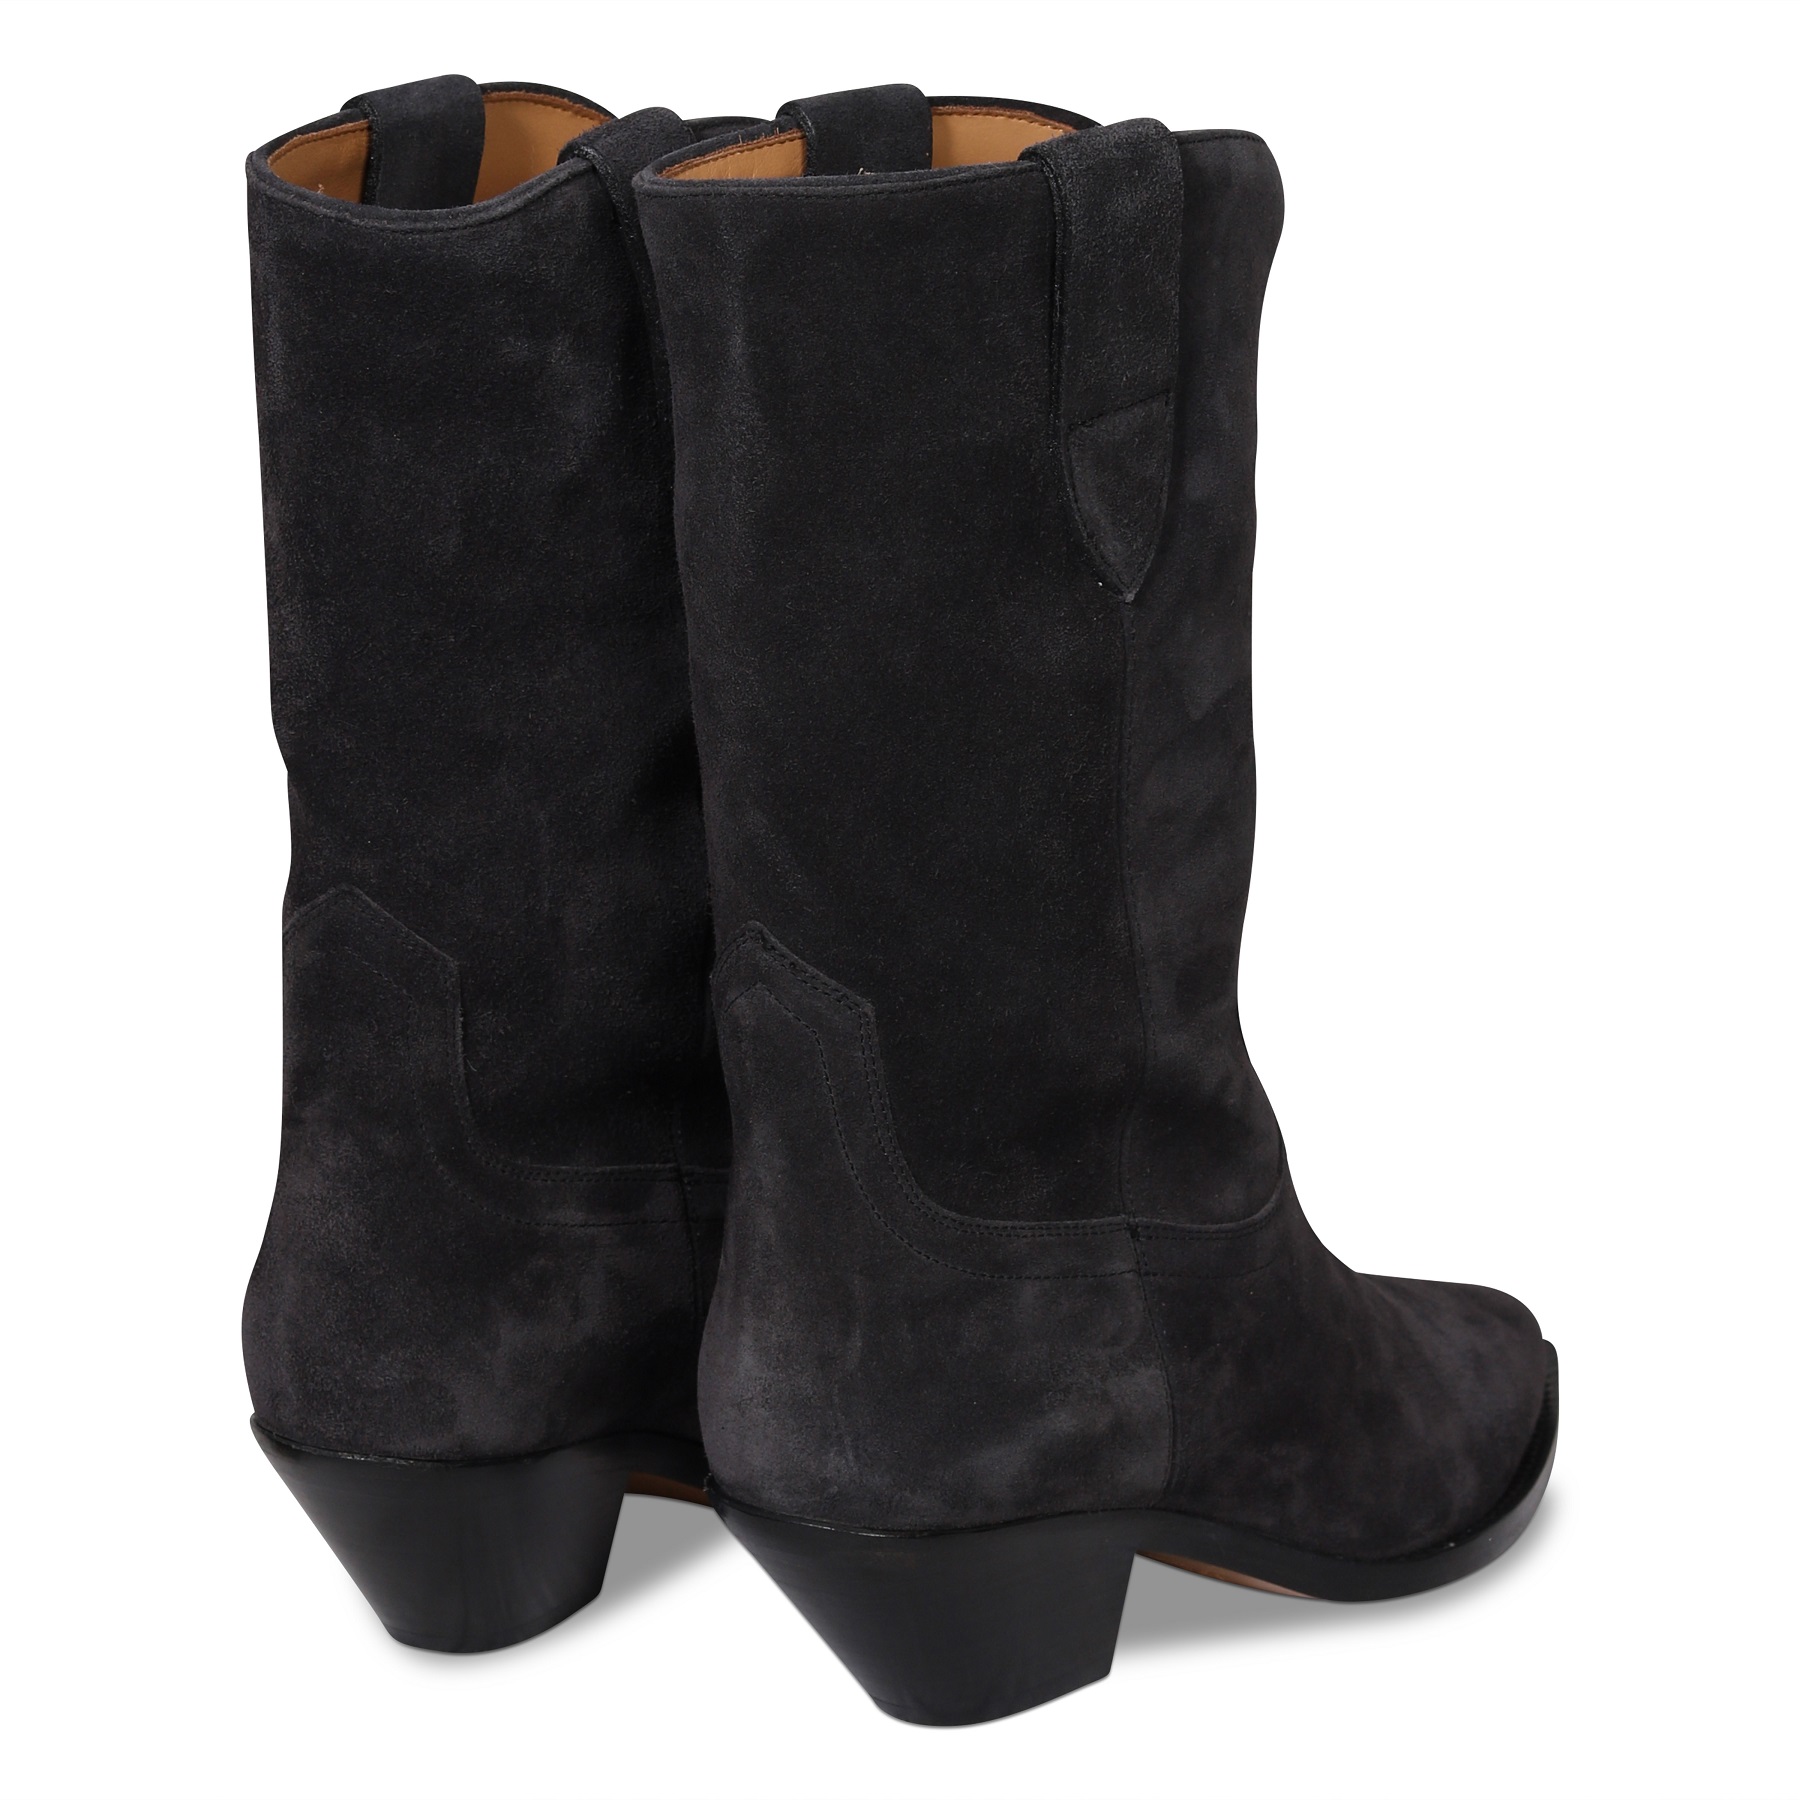 ISABEL MARANT Dahope Boots in Faded Black 41